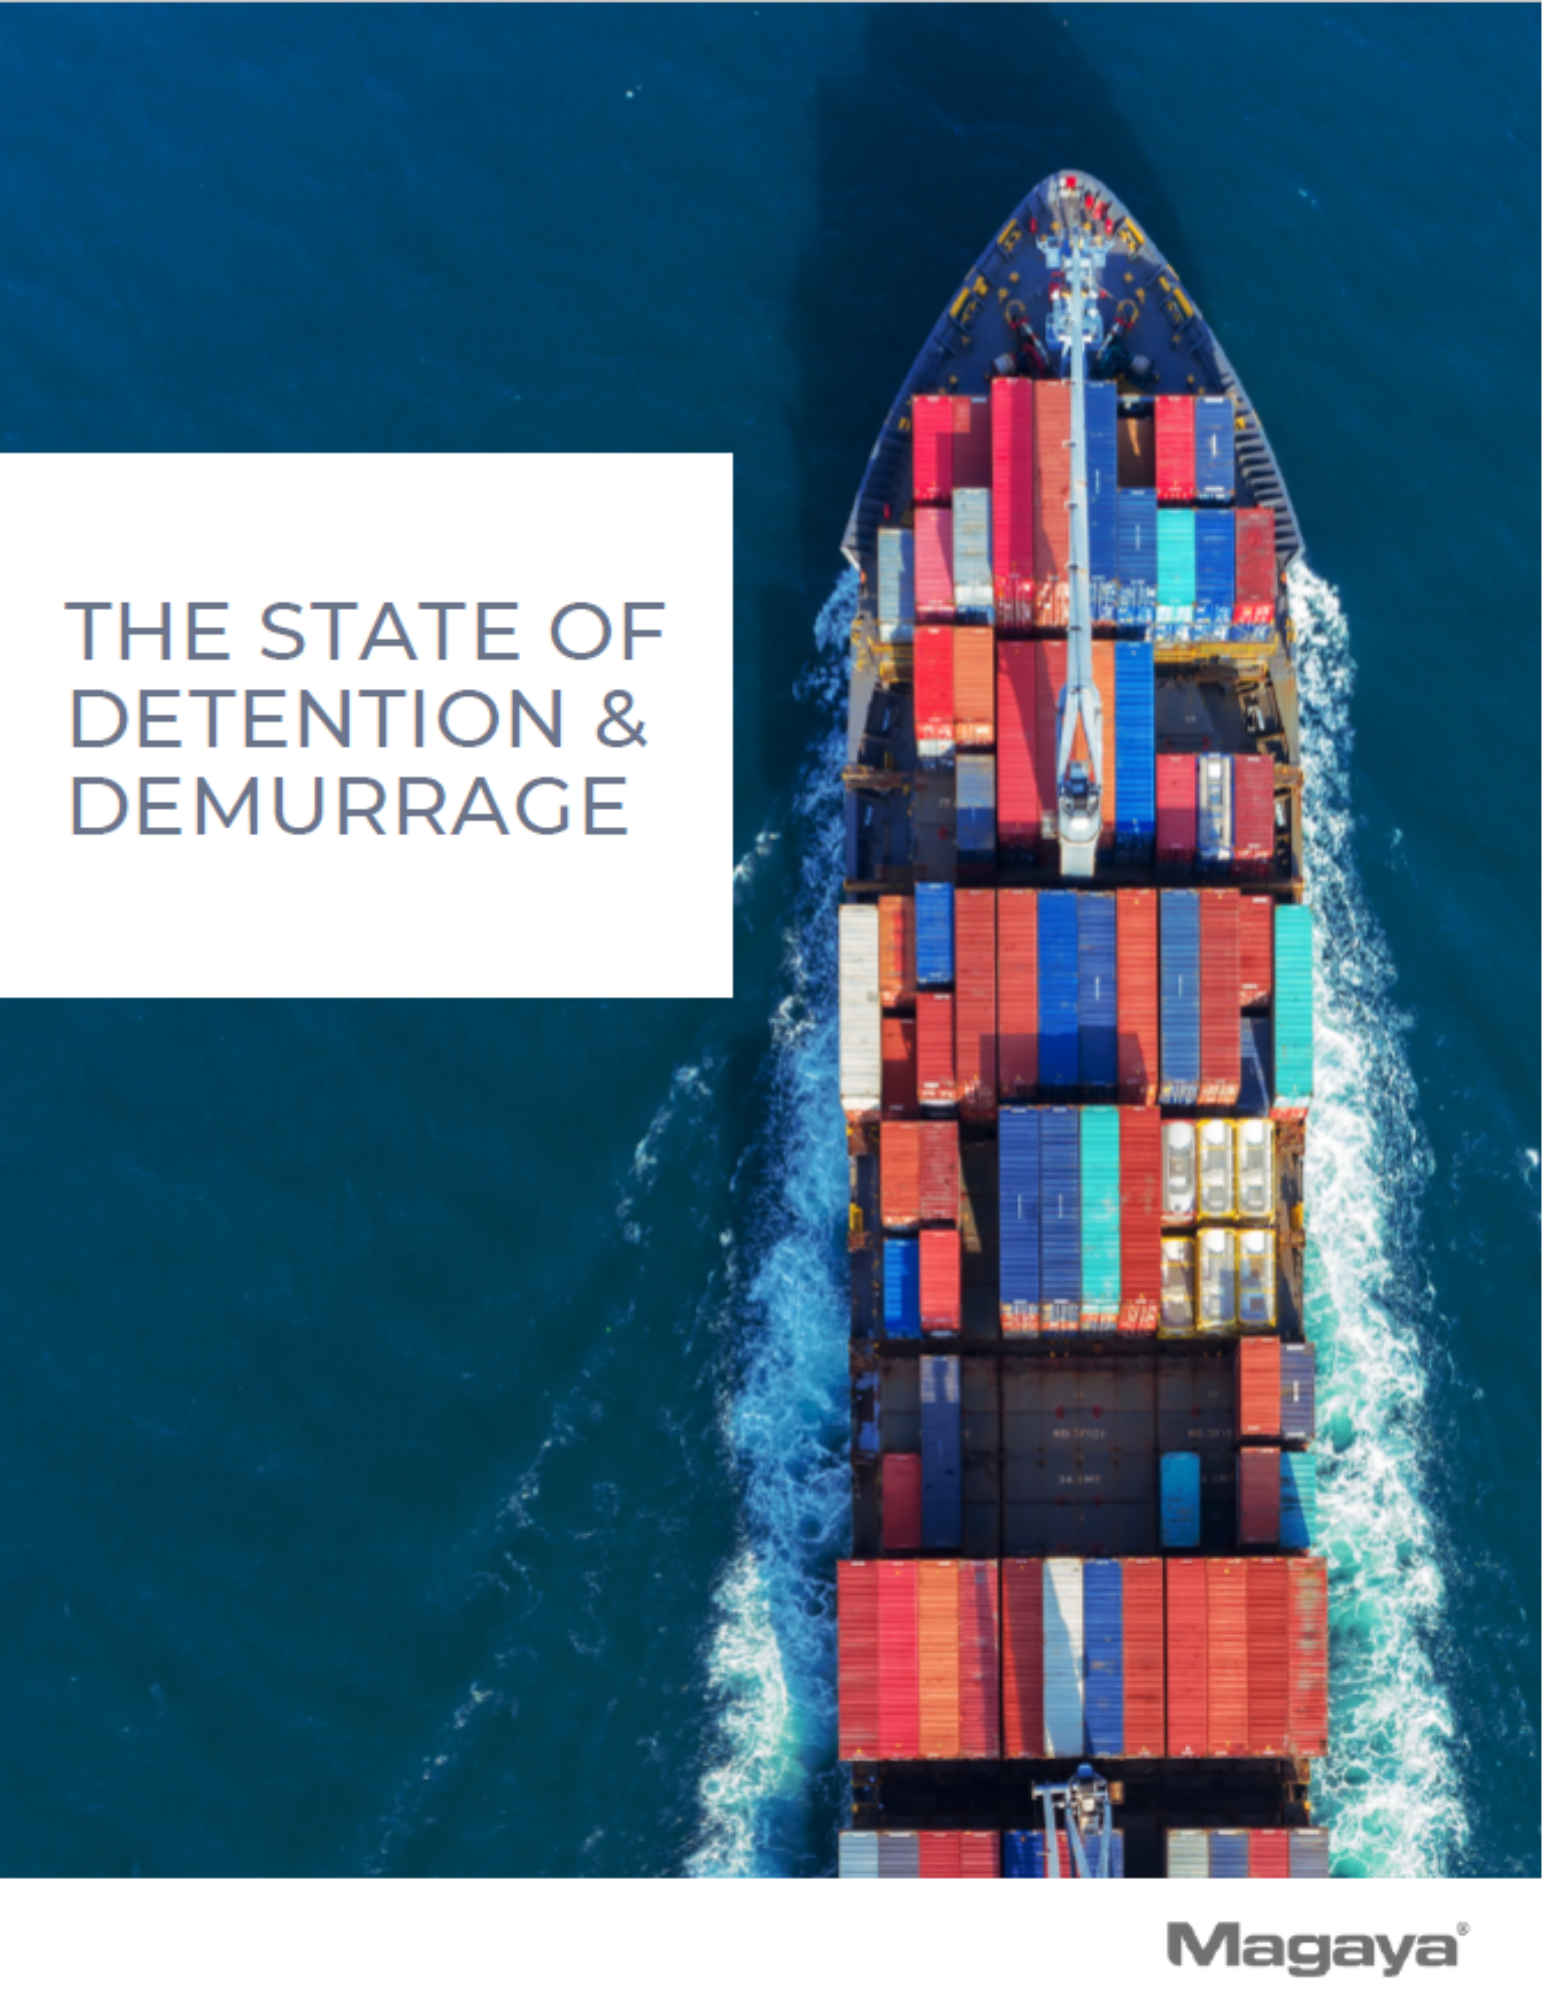 The State of Detention & Demurrage